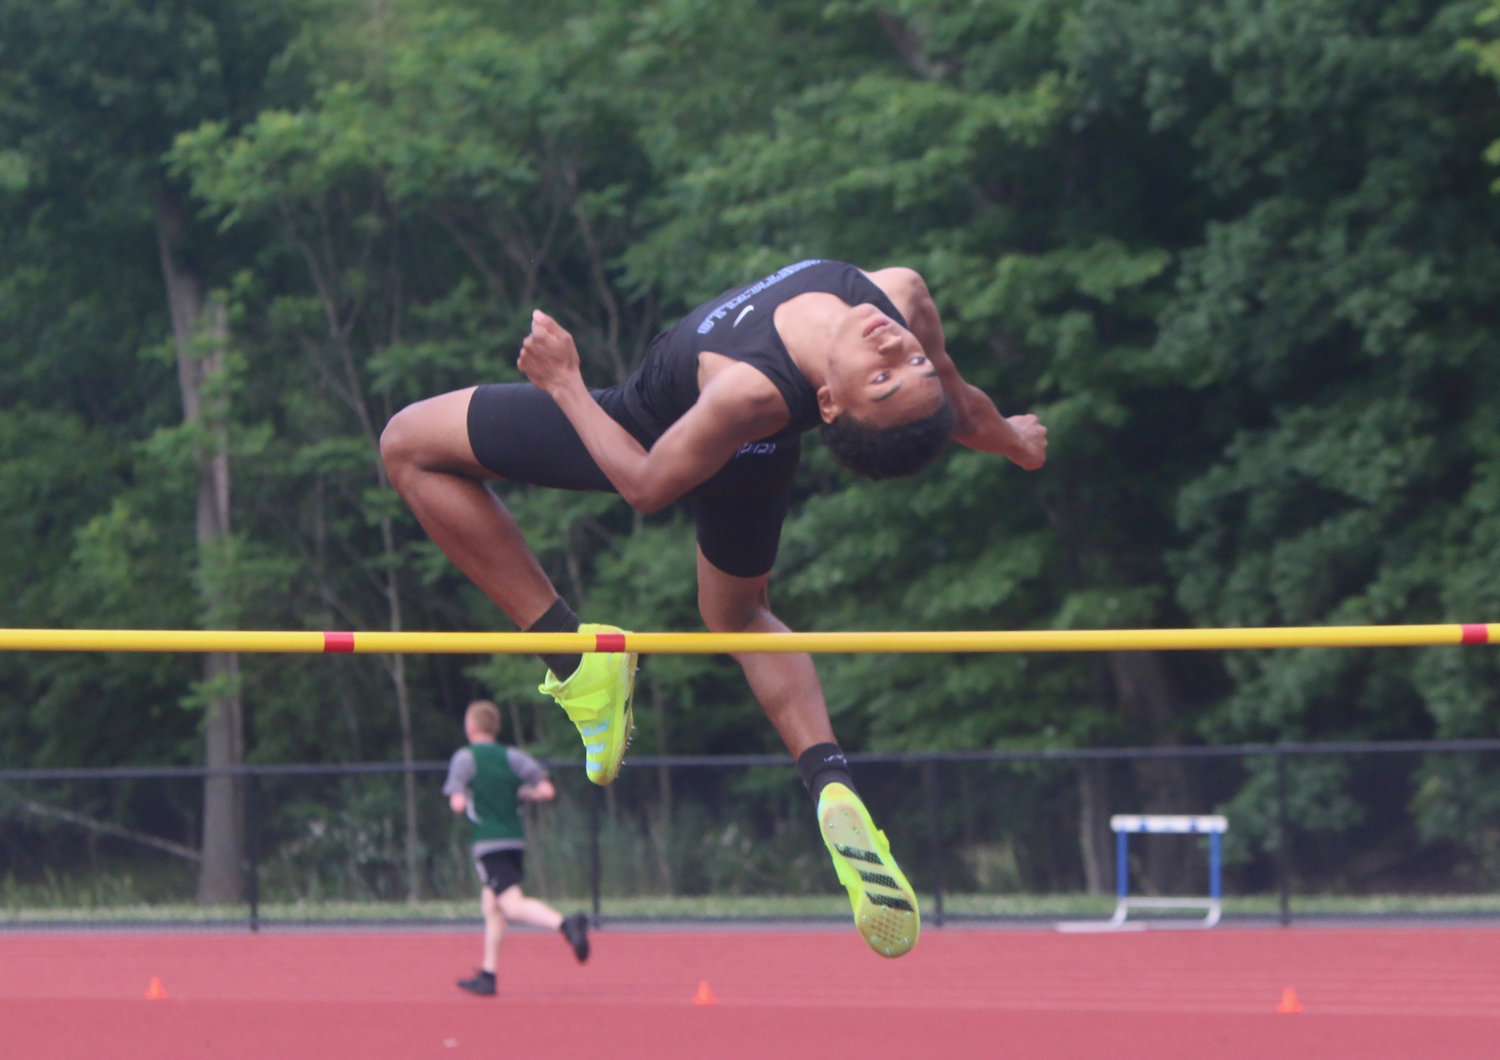 Coming off an impressive basketball season, Monticello’s Jadden Bryant resumes his fine jumping exploits. He won the Triple jump and took third in the high jump.